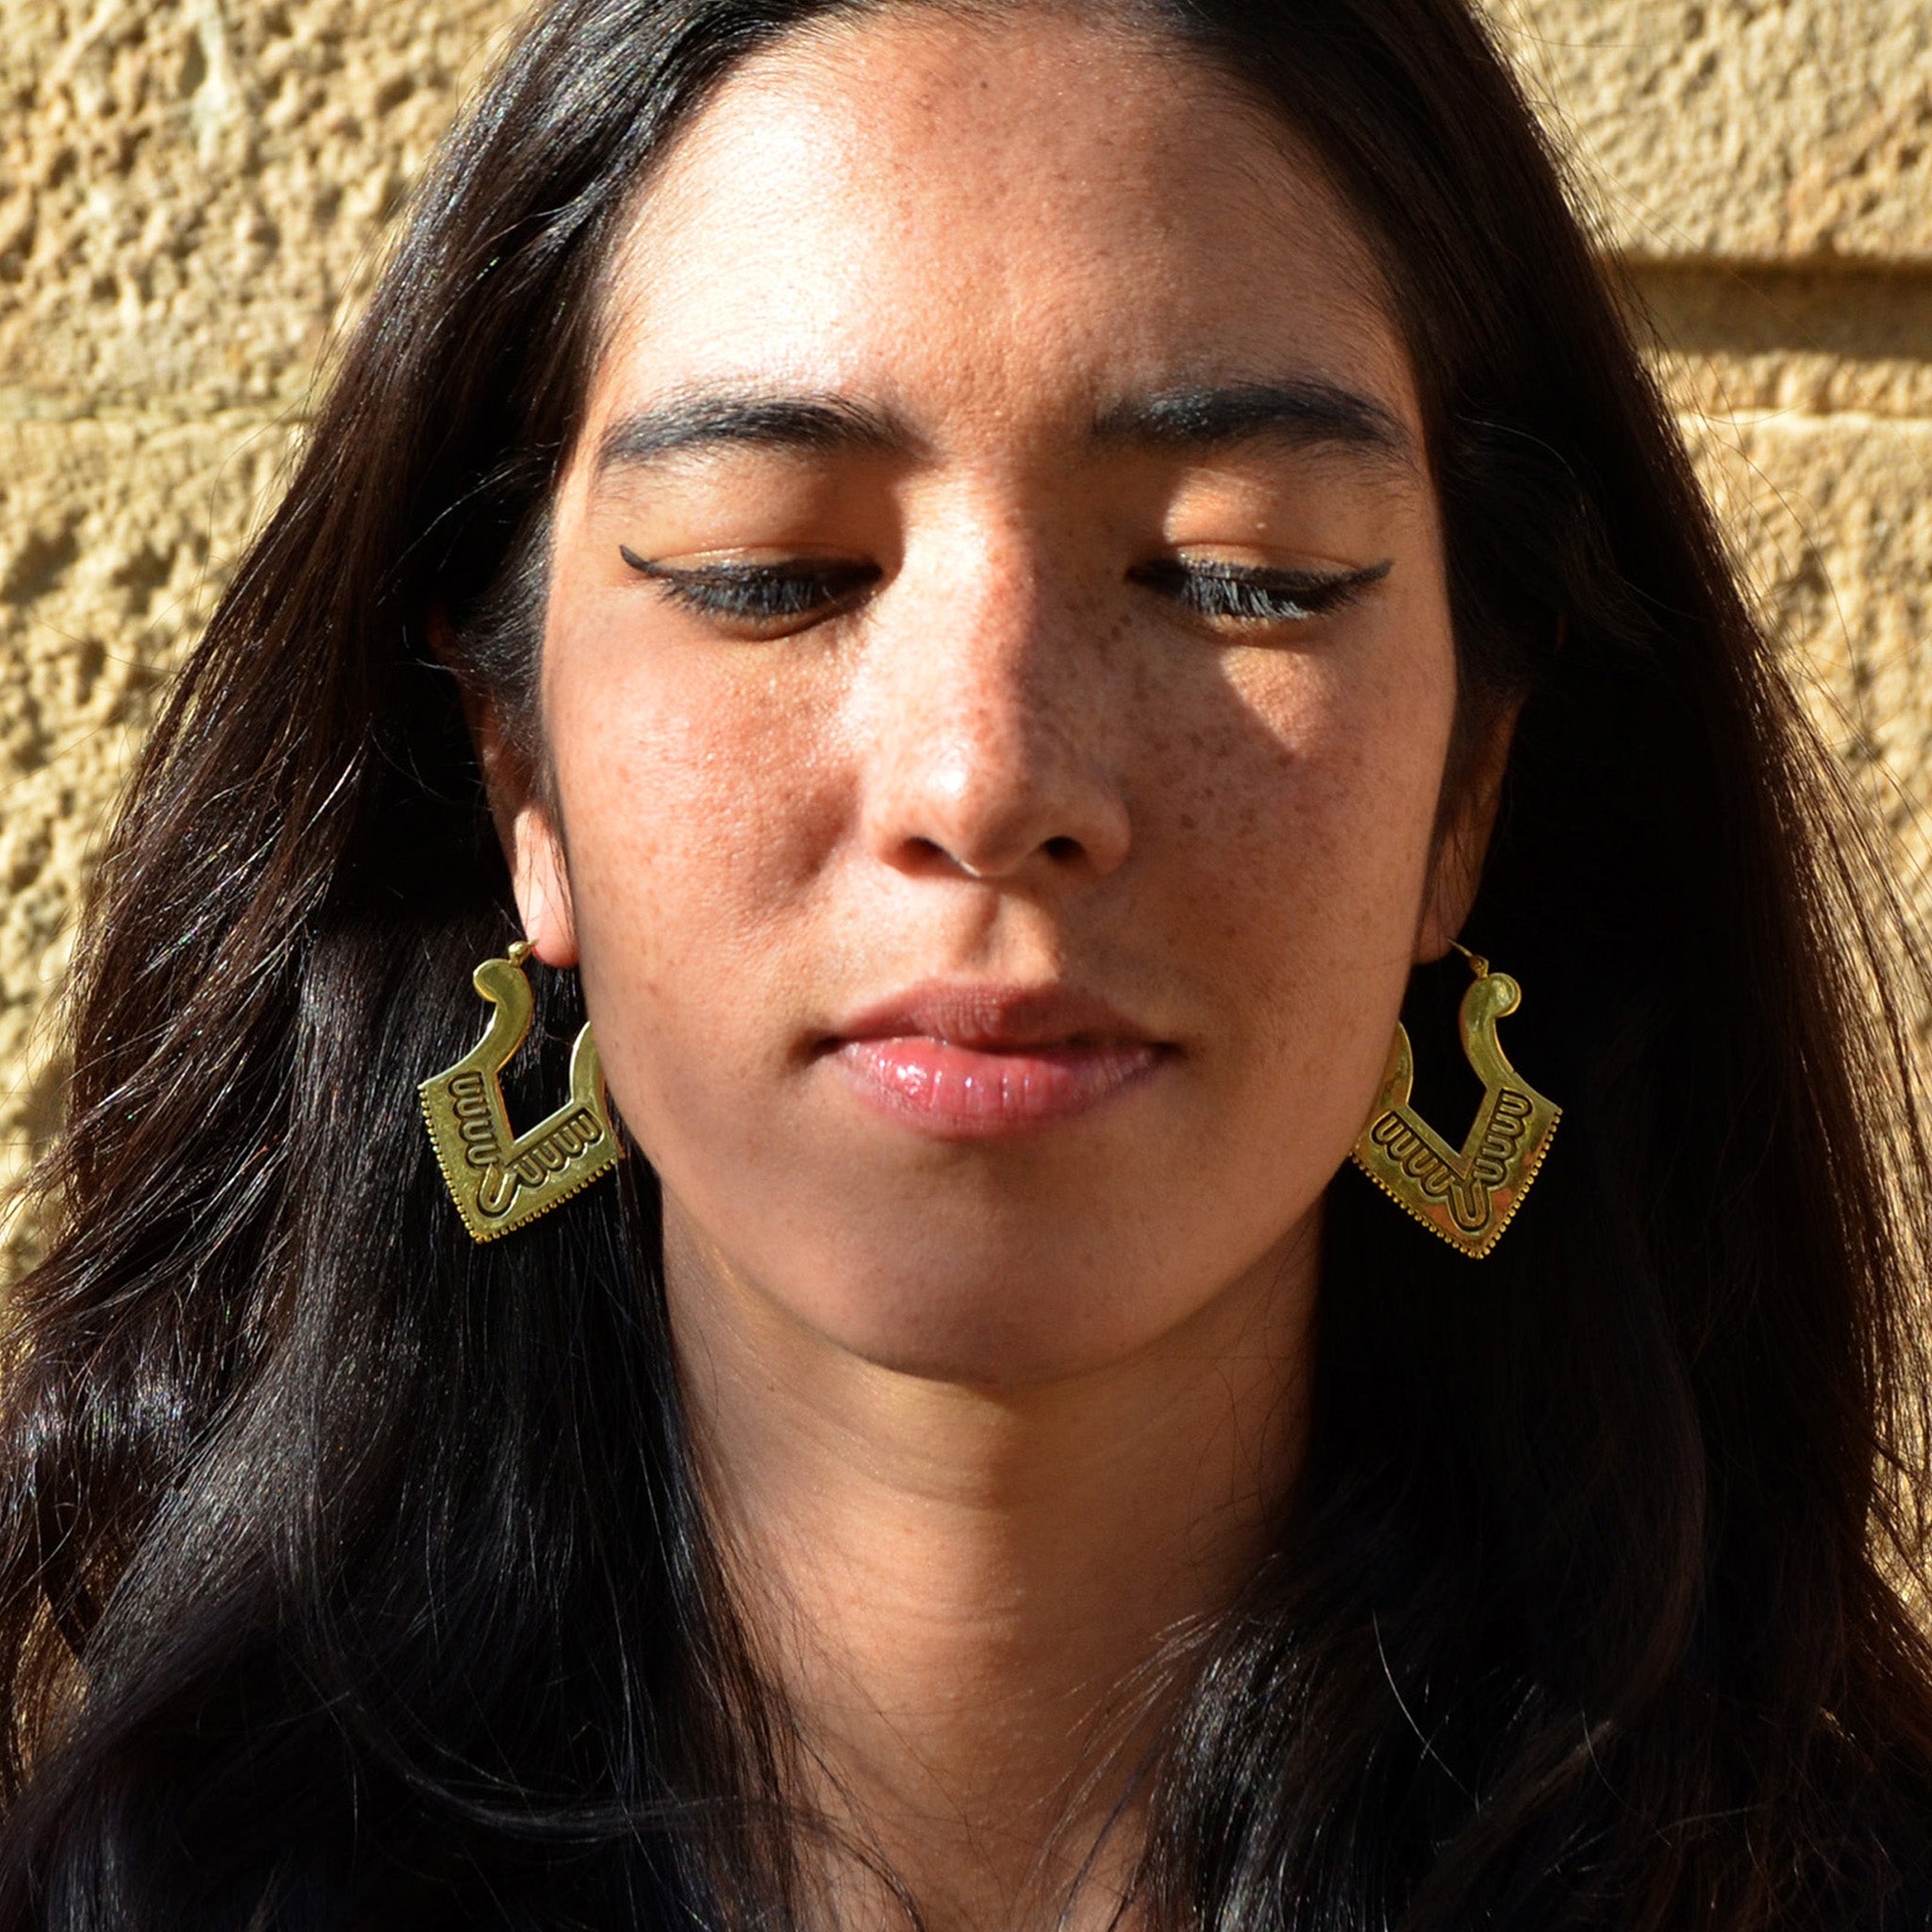 Young woman with aztec gold earrings